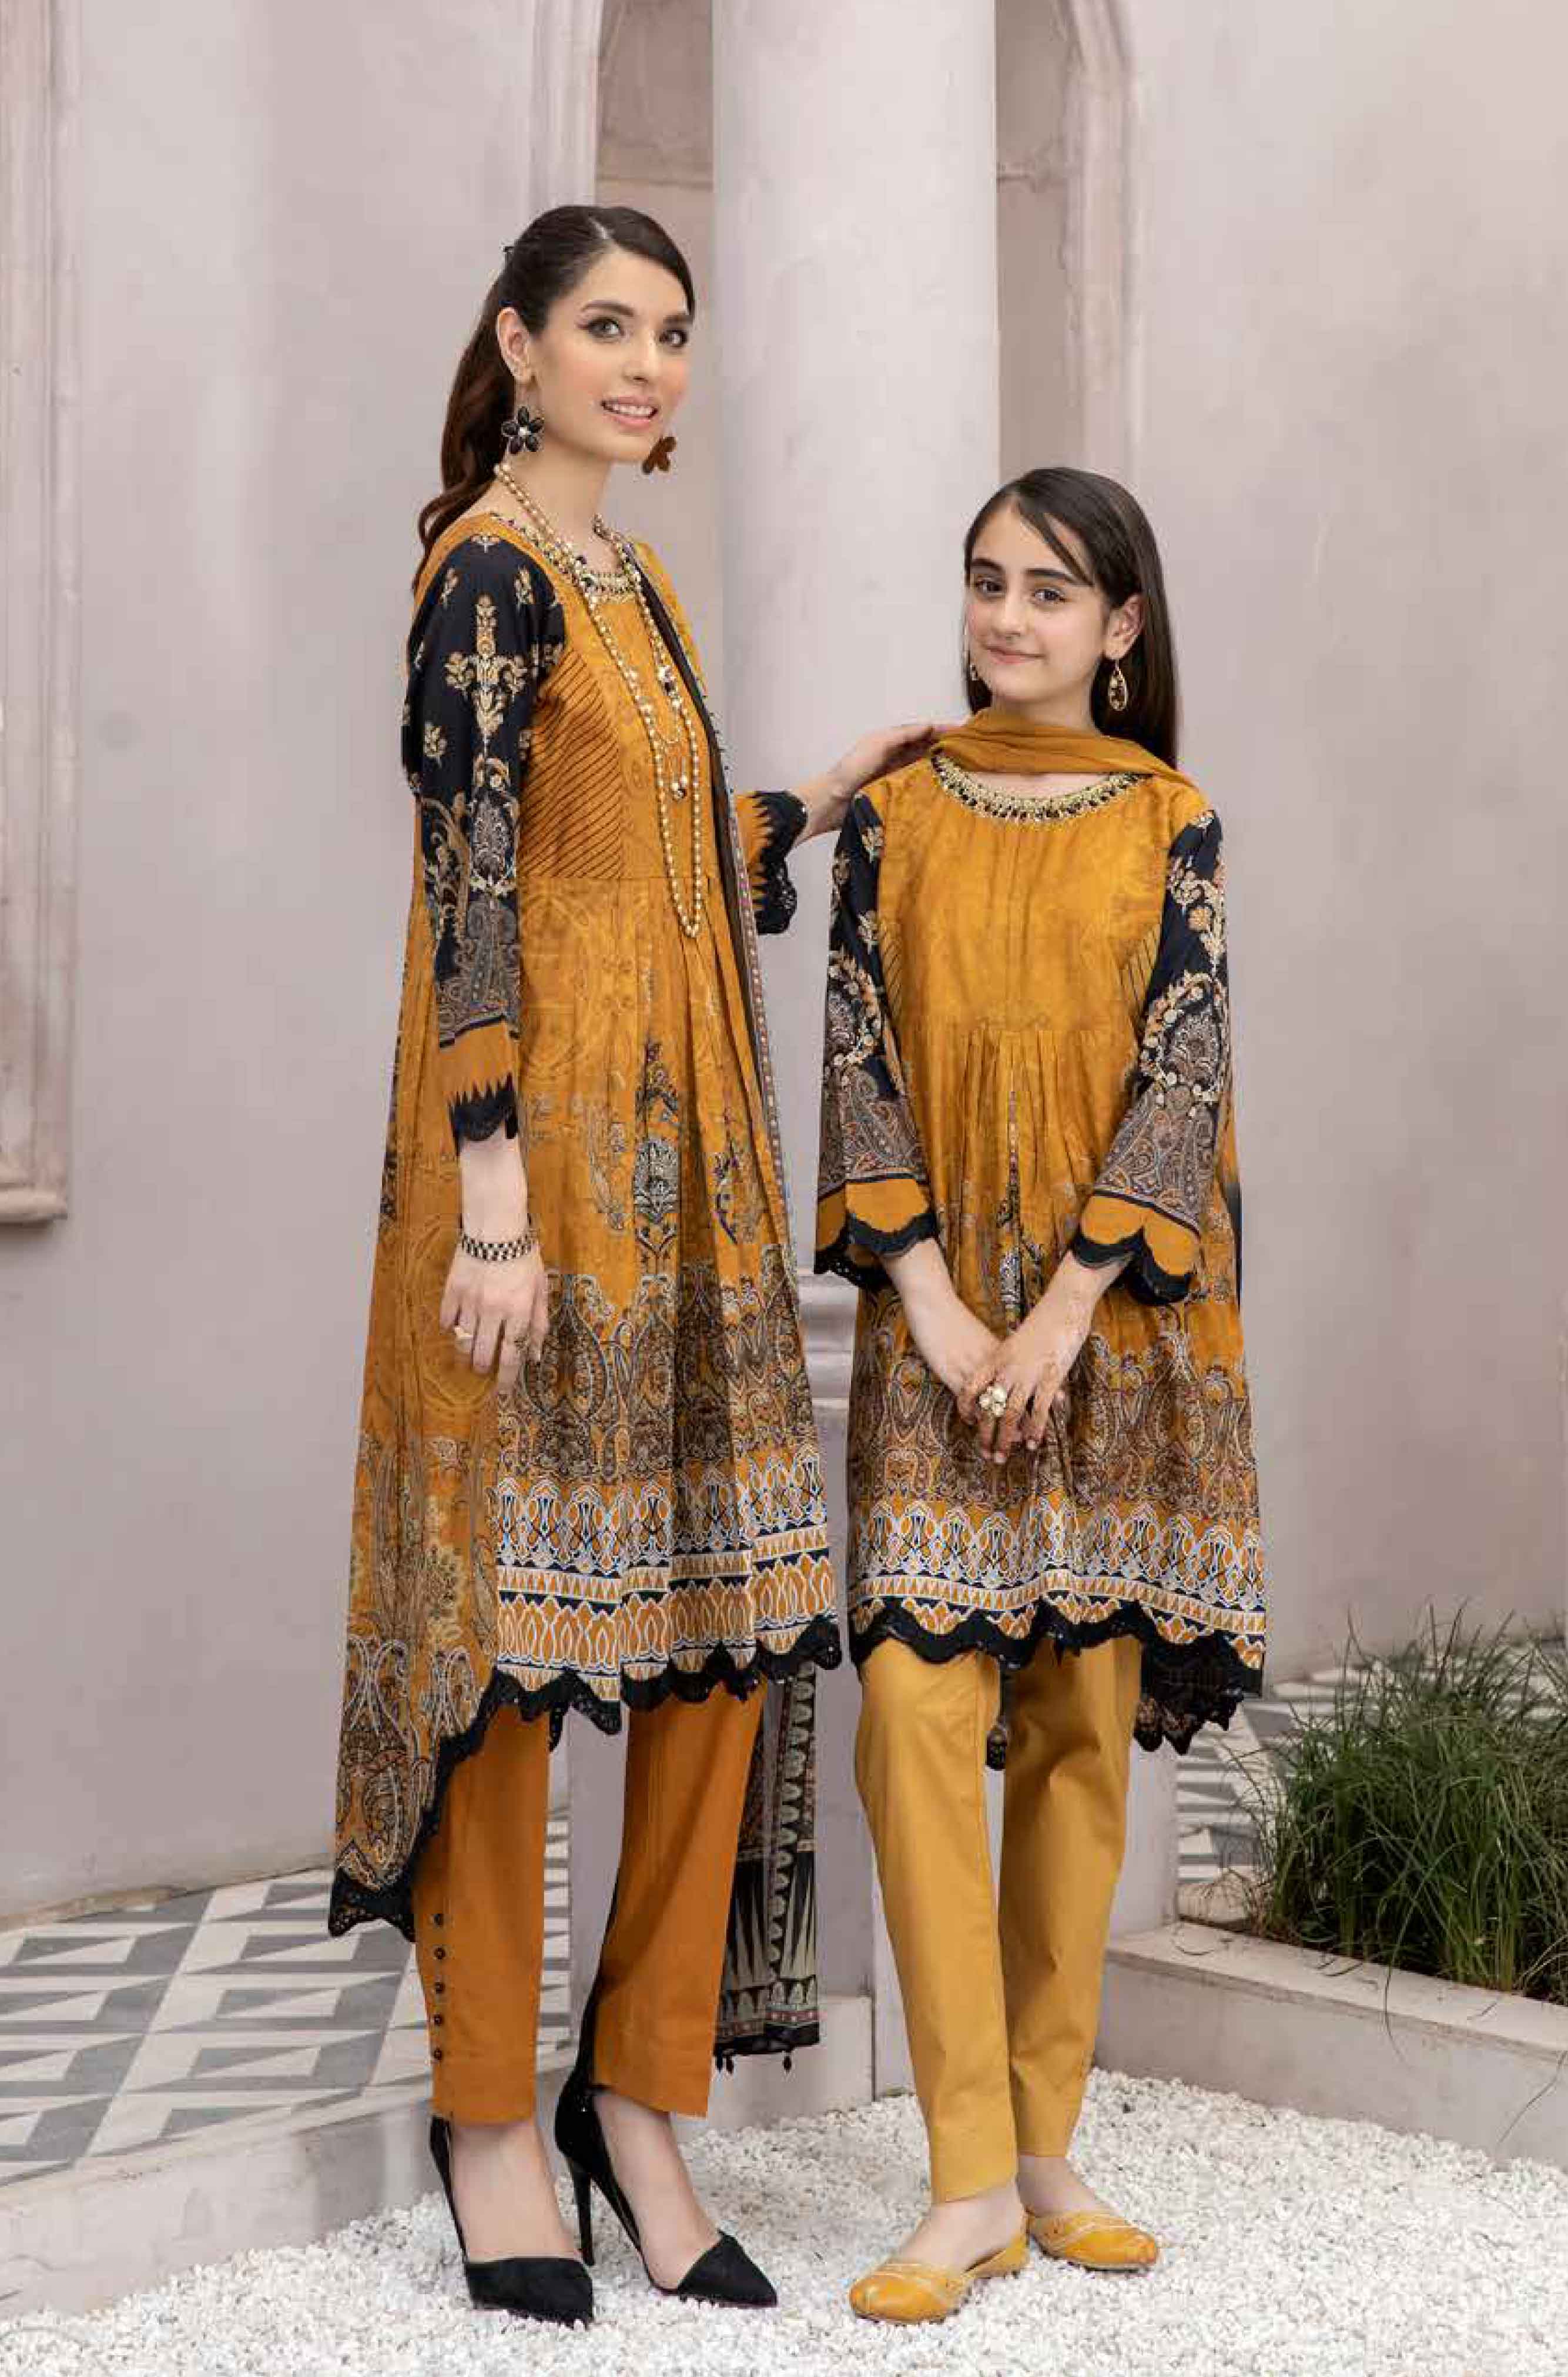 Simrans Mother & Daughter Girls Frock Outfit AL395K